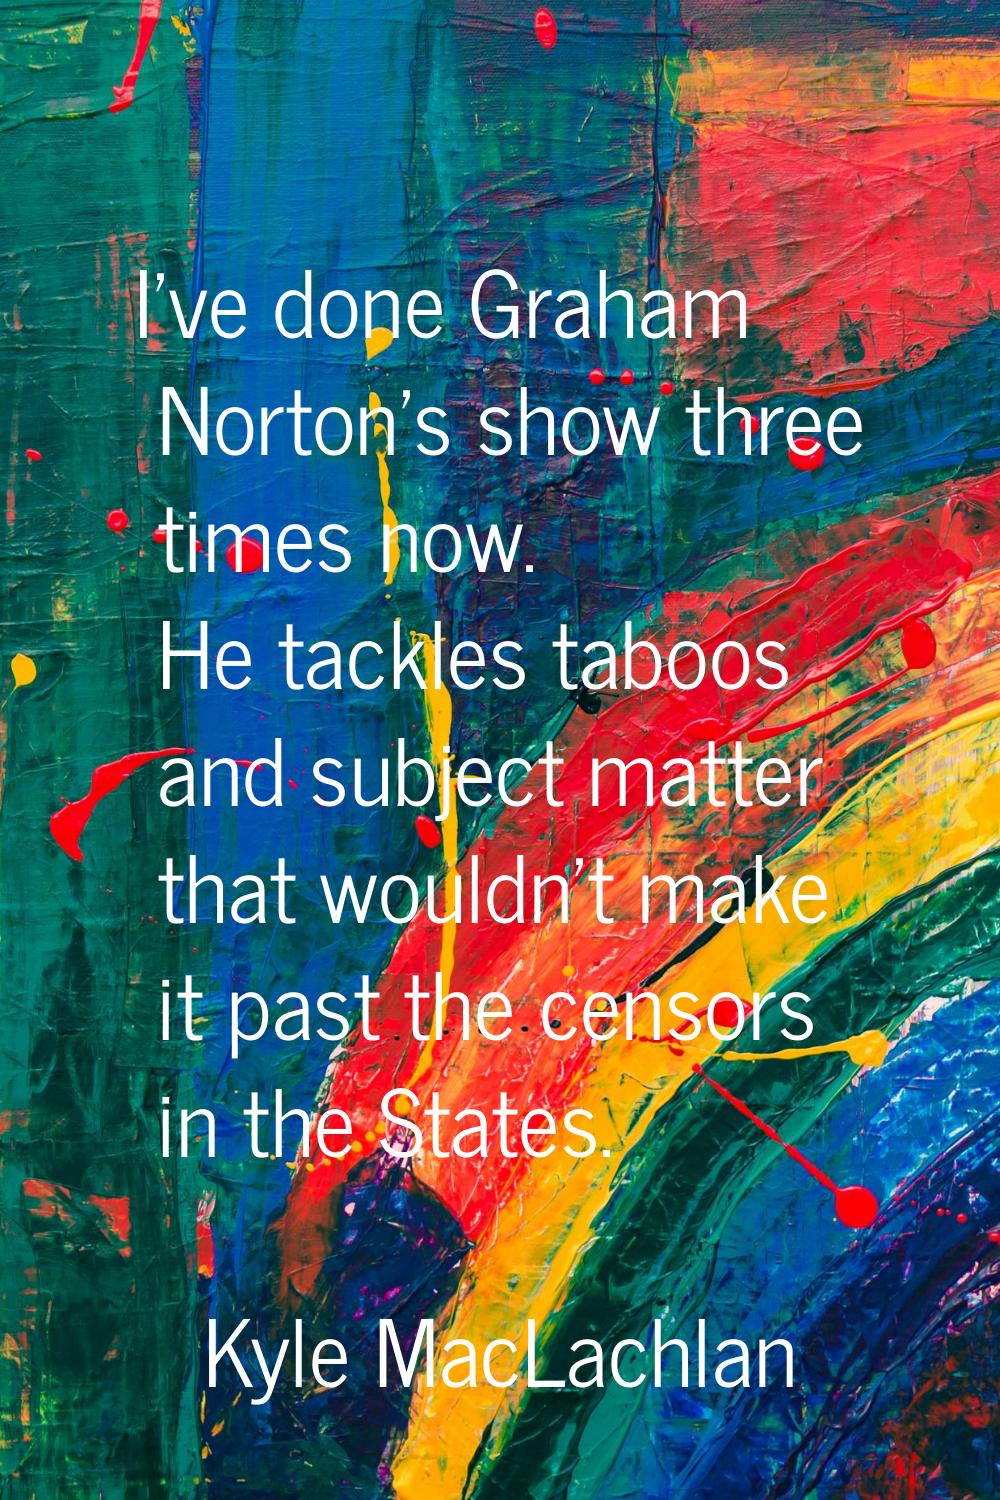 I've done Graham Norton's show three times now. He tackles taboos and subject matter that wouldn't 